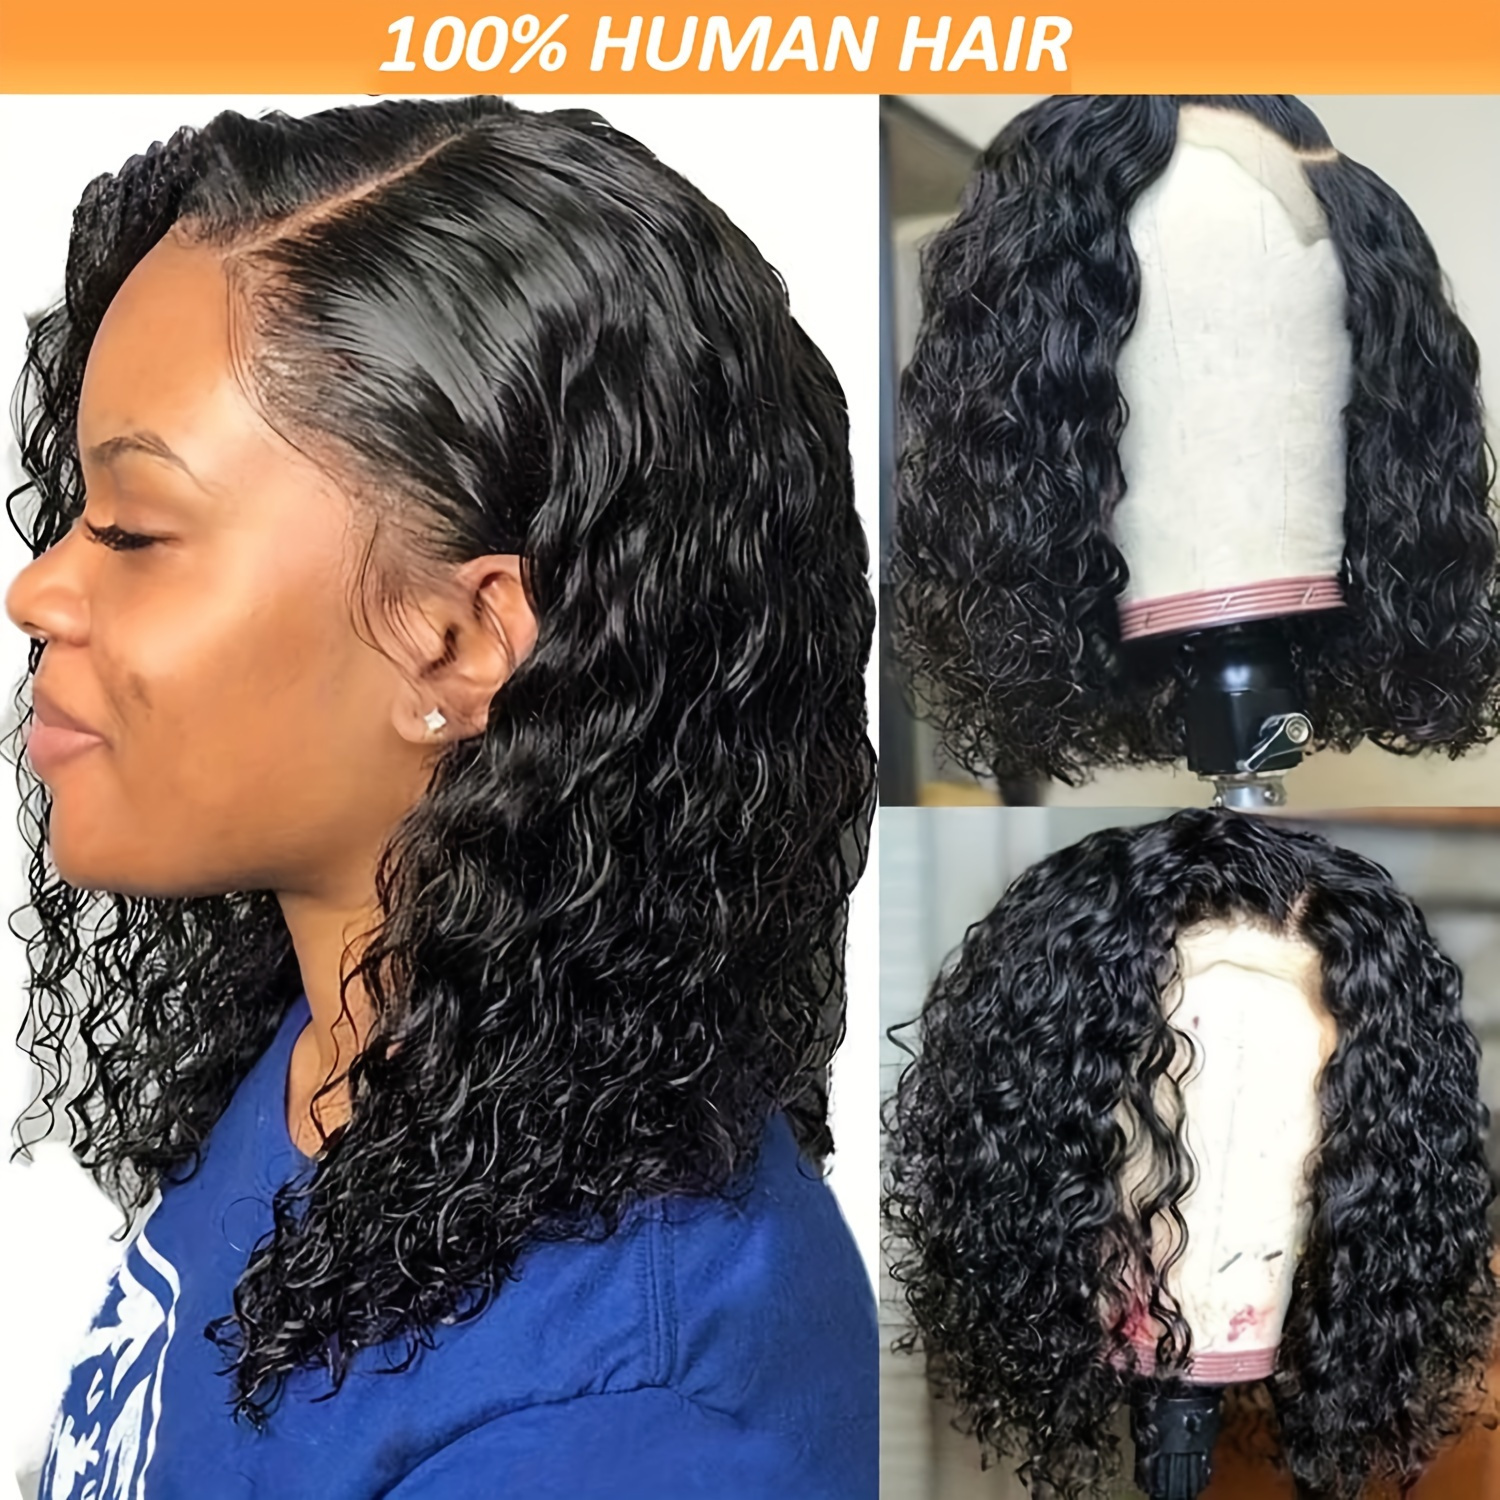 

Curly Bob Wigs Human Hair 13x4 Hd Transparent Lace Front Human Hair Wigs For Women Deep Wave Frontal Wigs Pre Plucked With Baby Hair Natural Hairline 150% Density 10-16 Inches